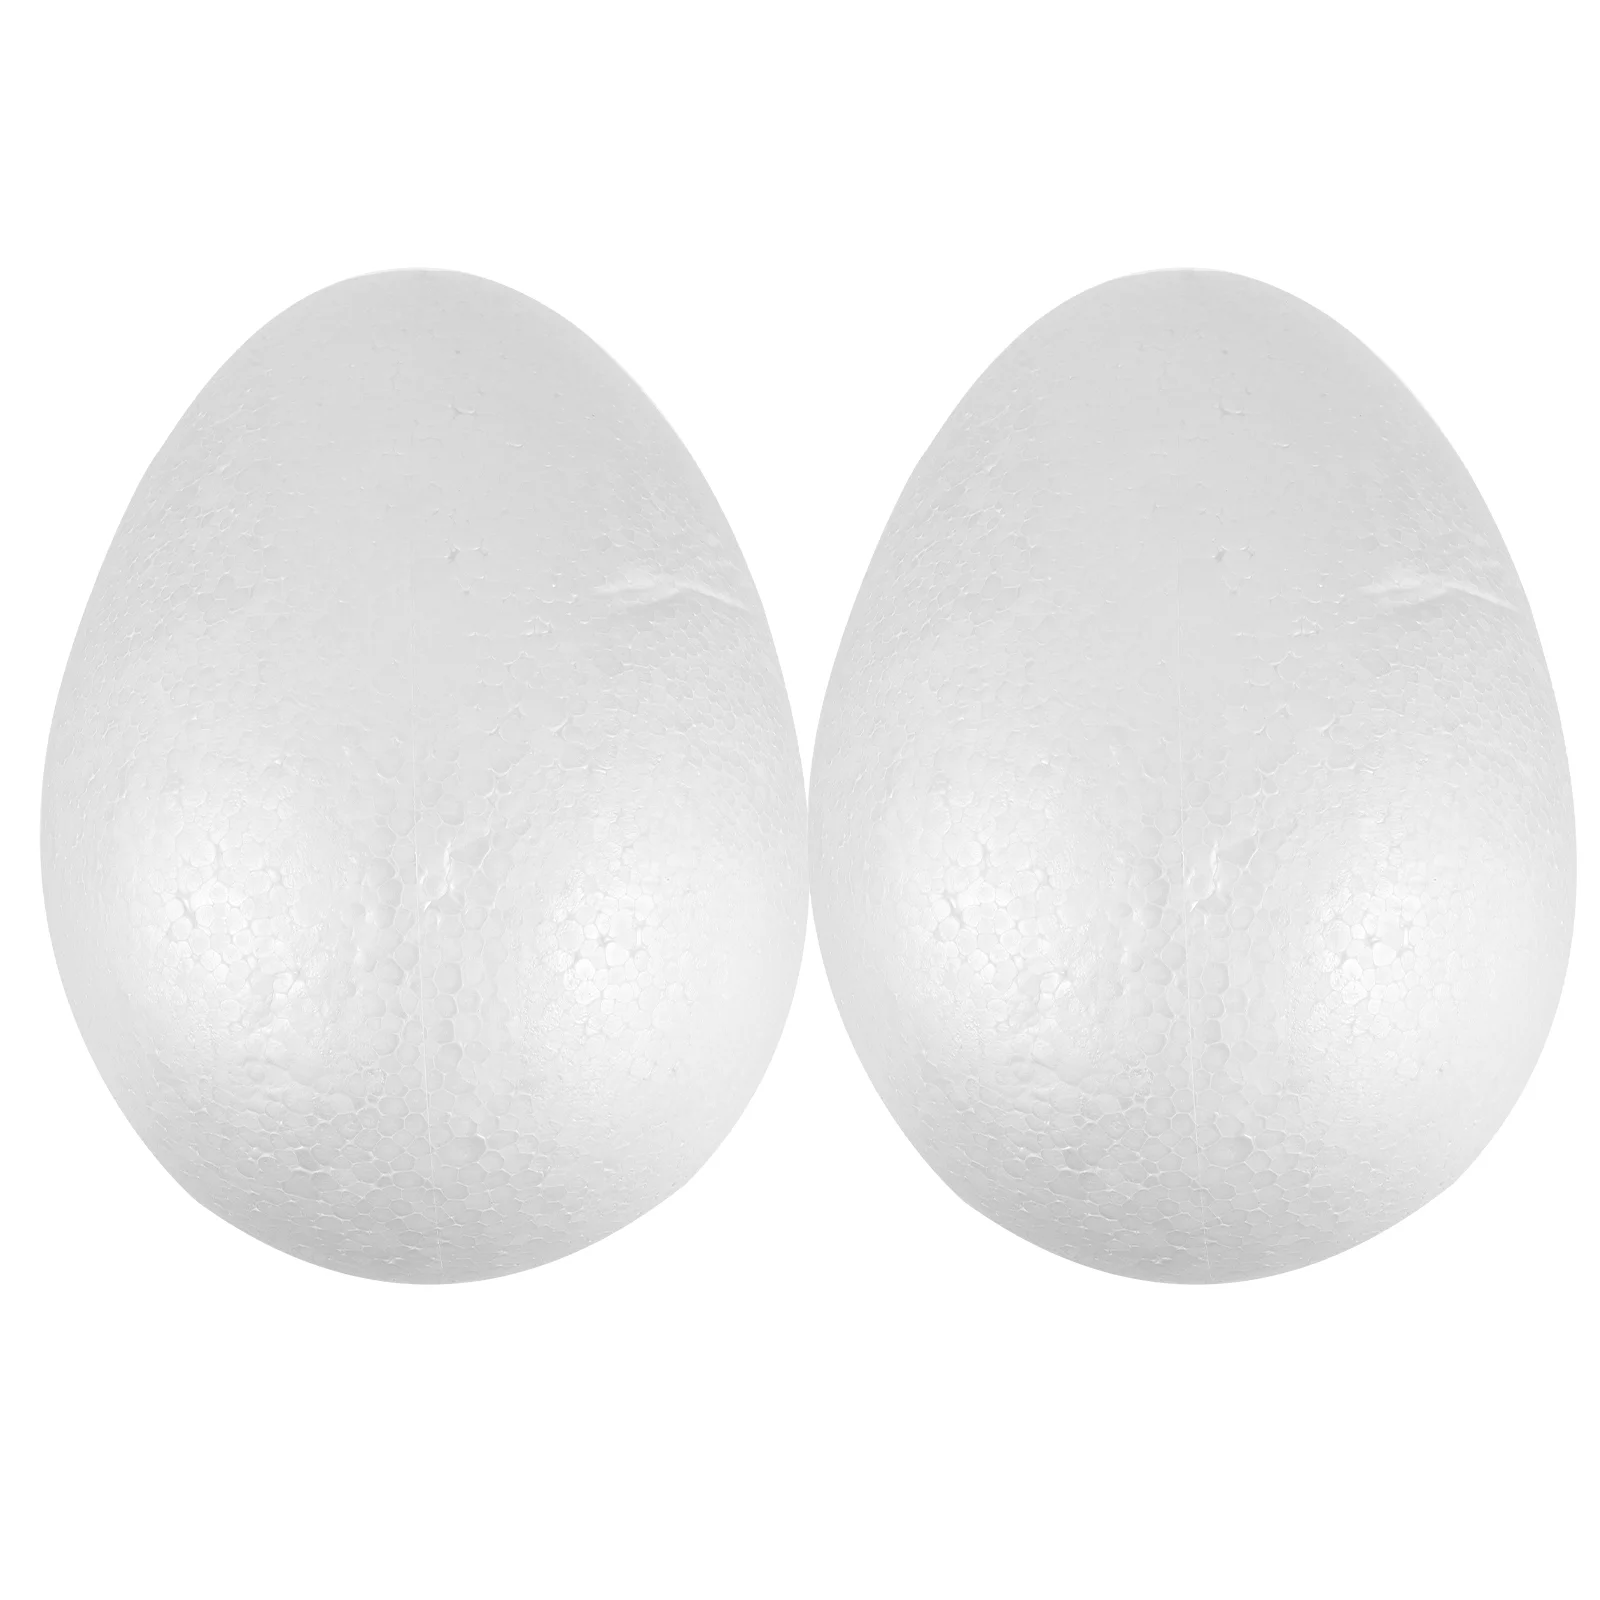 

2 Pcs Spring Decorations Outdoor Egg Foams Materials White Easter DIY Eggs Child Oil pan